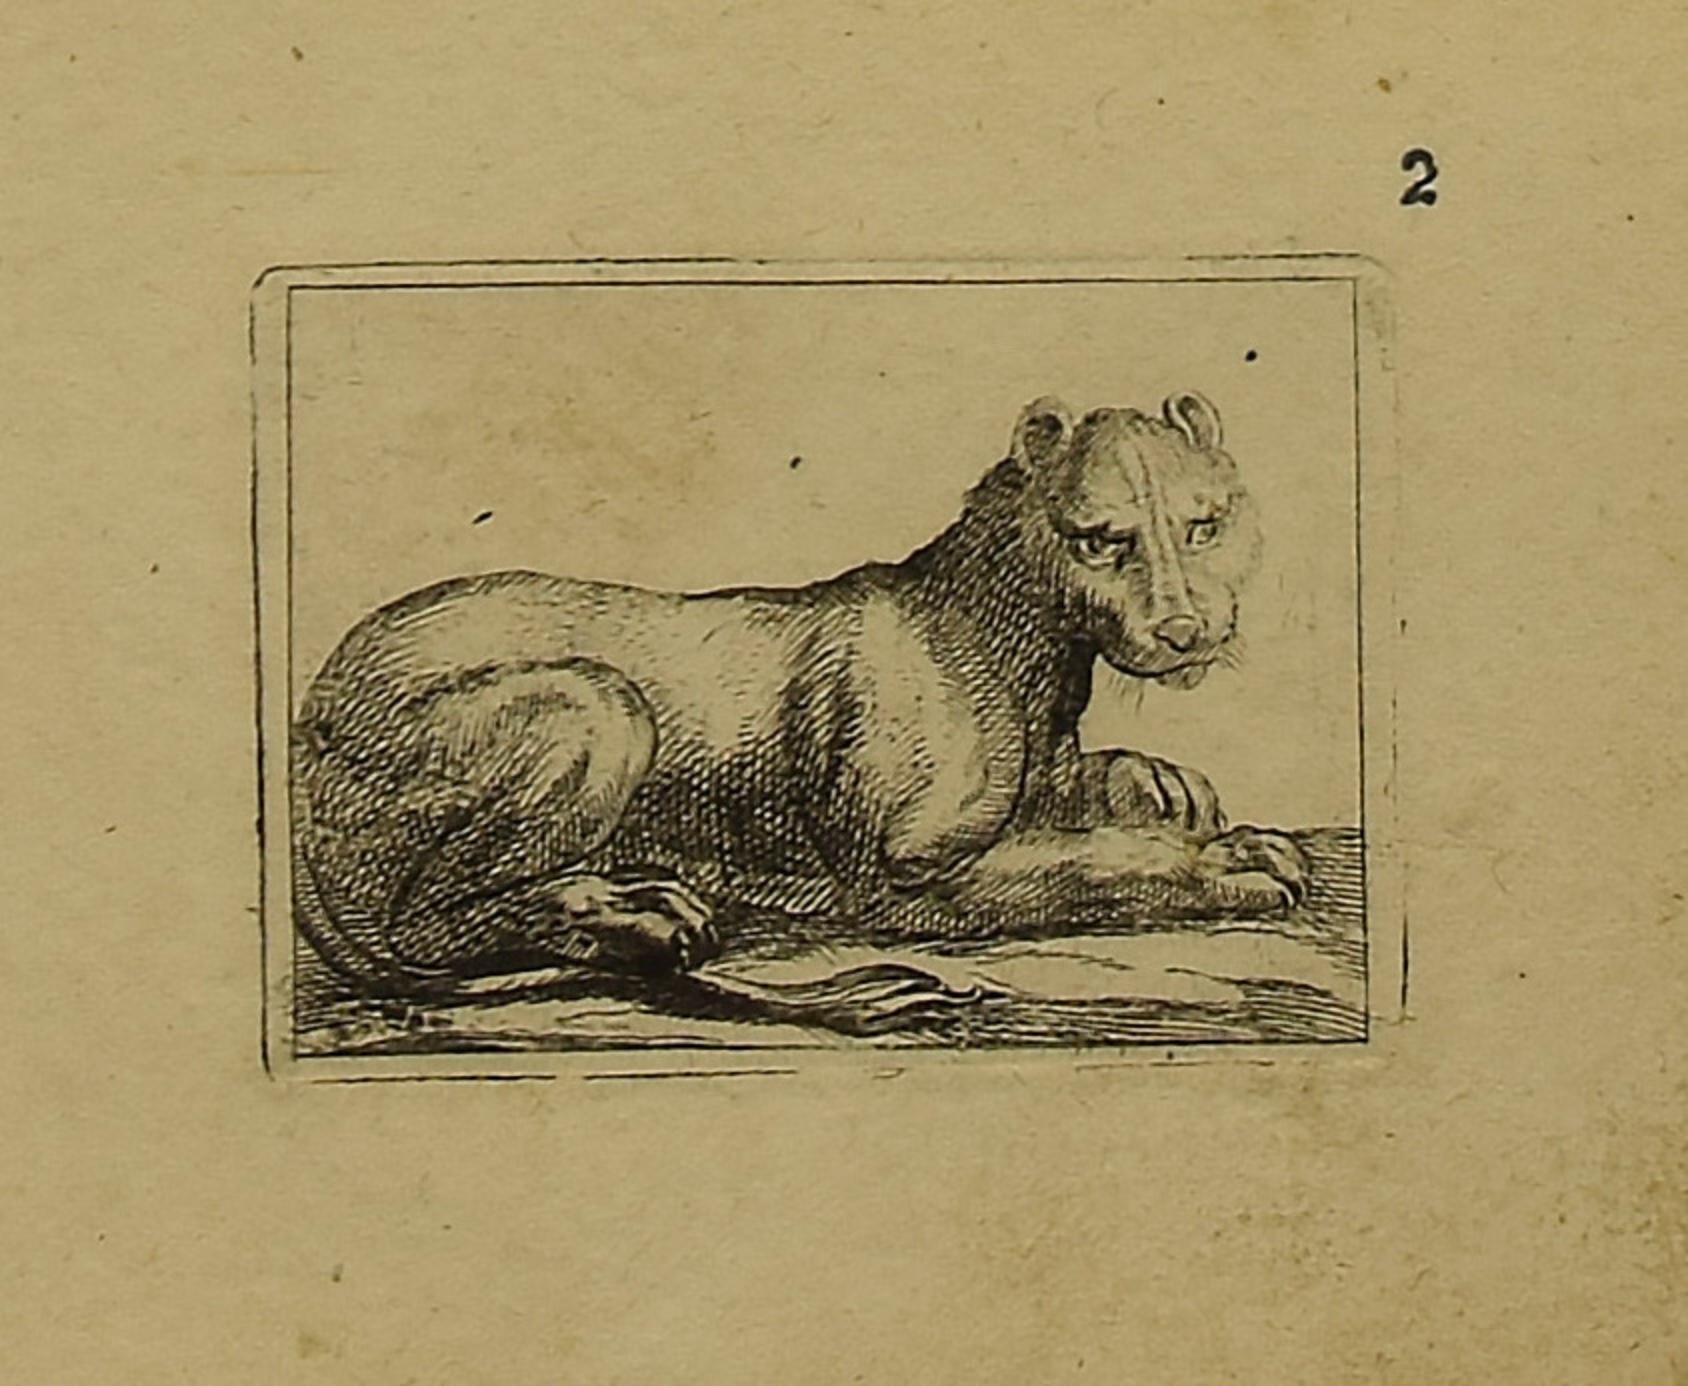 The lioness is a wonderful black and white etching on thick laid paper, realized by the Italian master Antonio Tempesta (1555-1630).

Not signed. 

In excellent conditions.

Including a cream-colored cardboard passepartout,  34 x 49 cm. Image